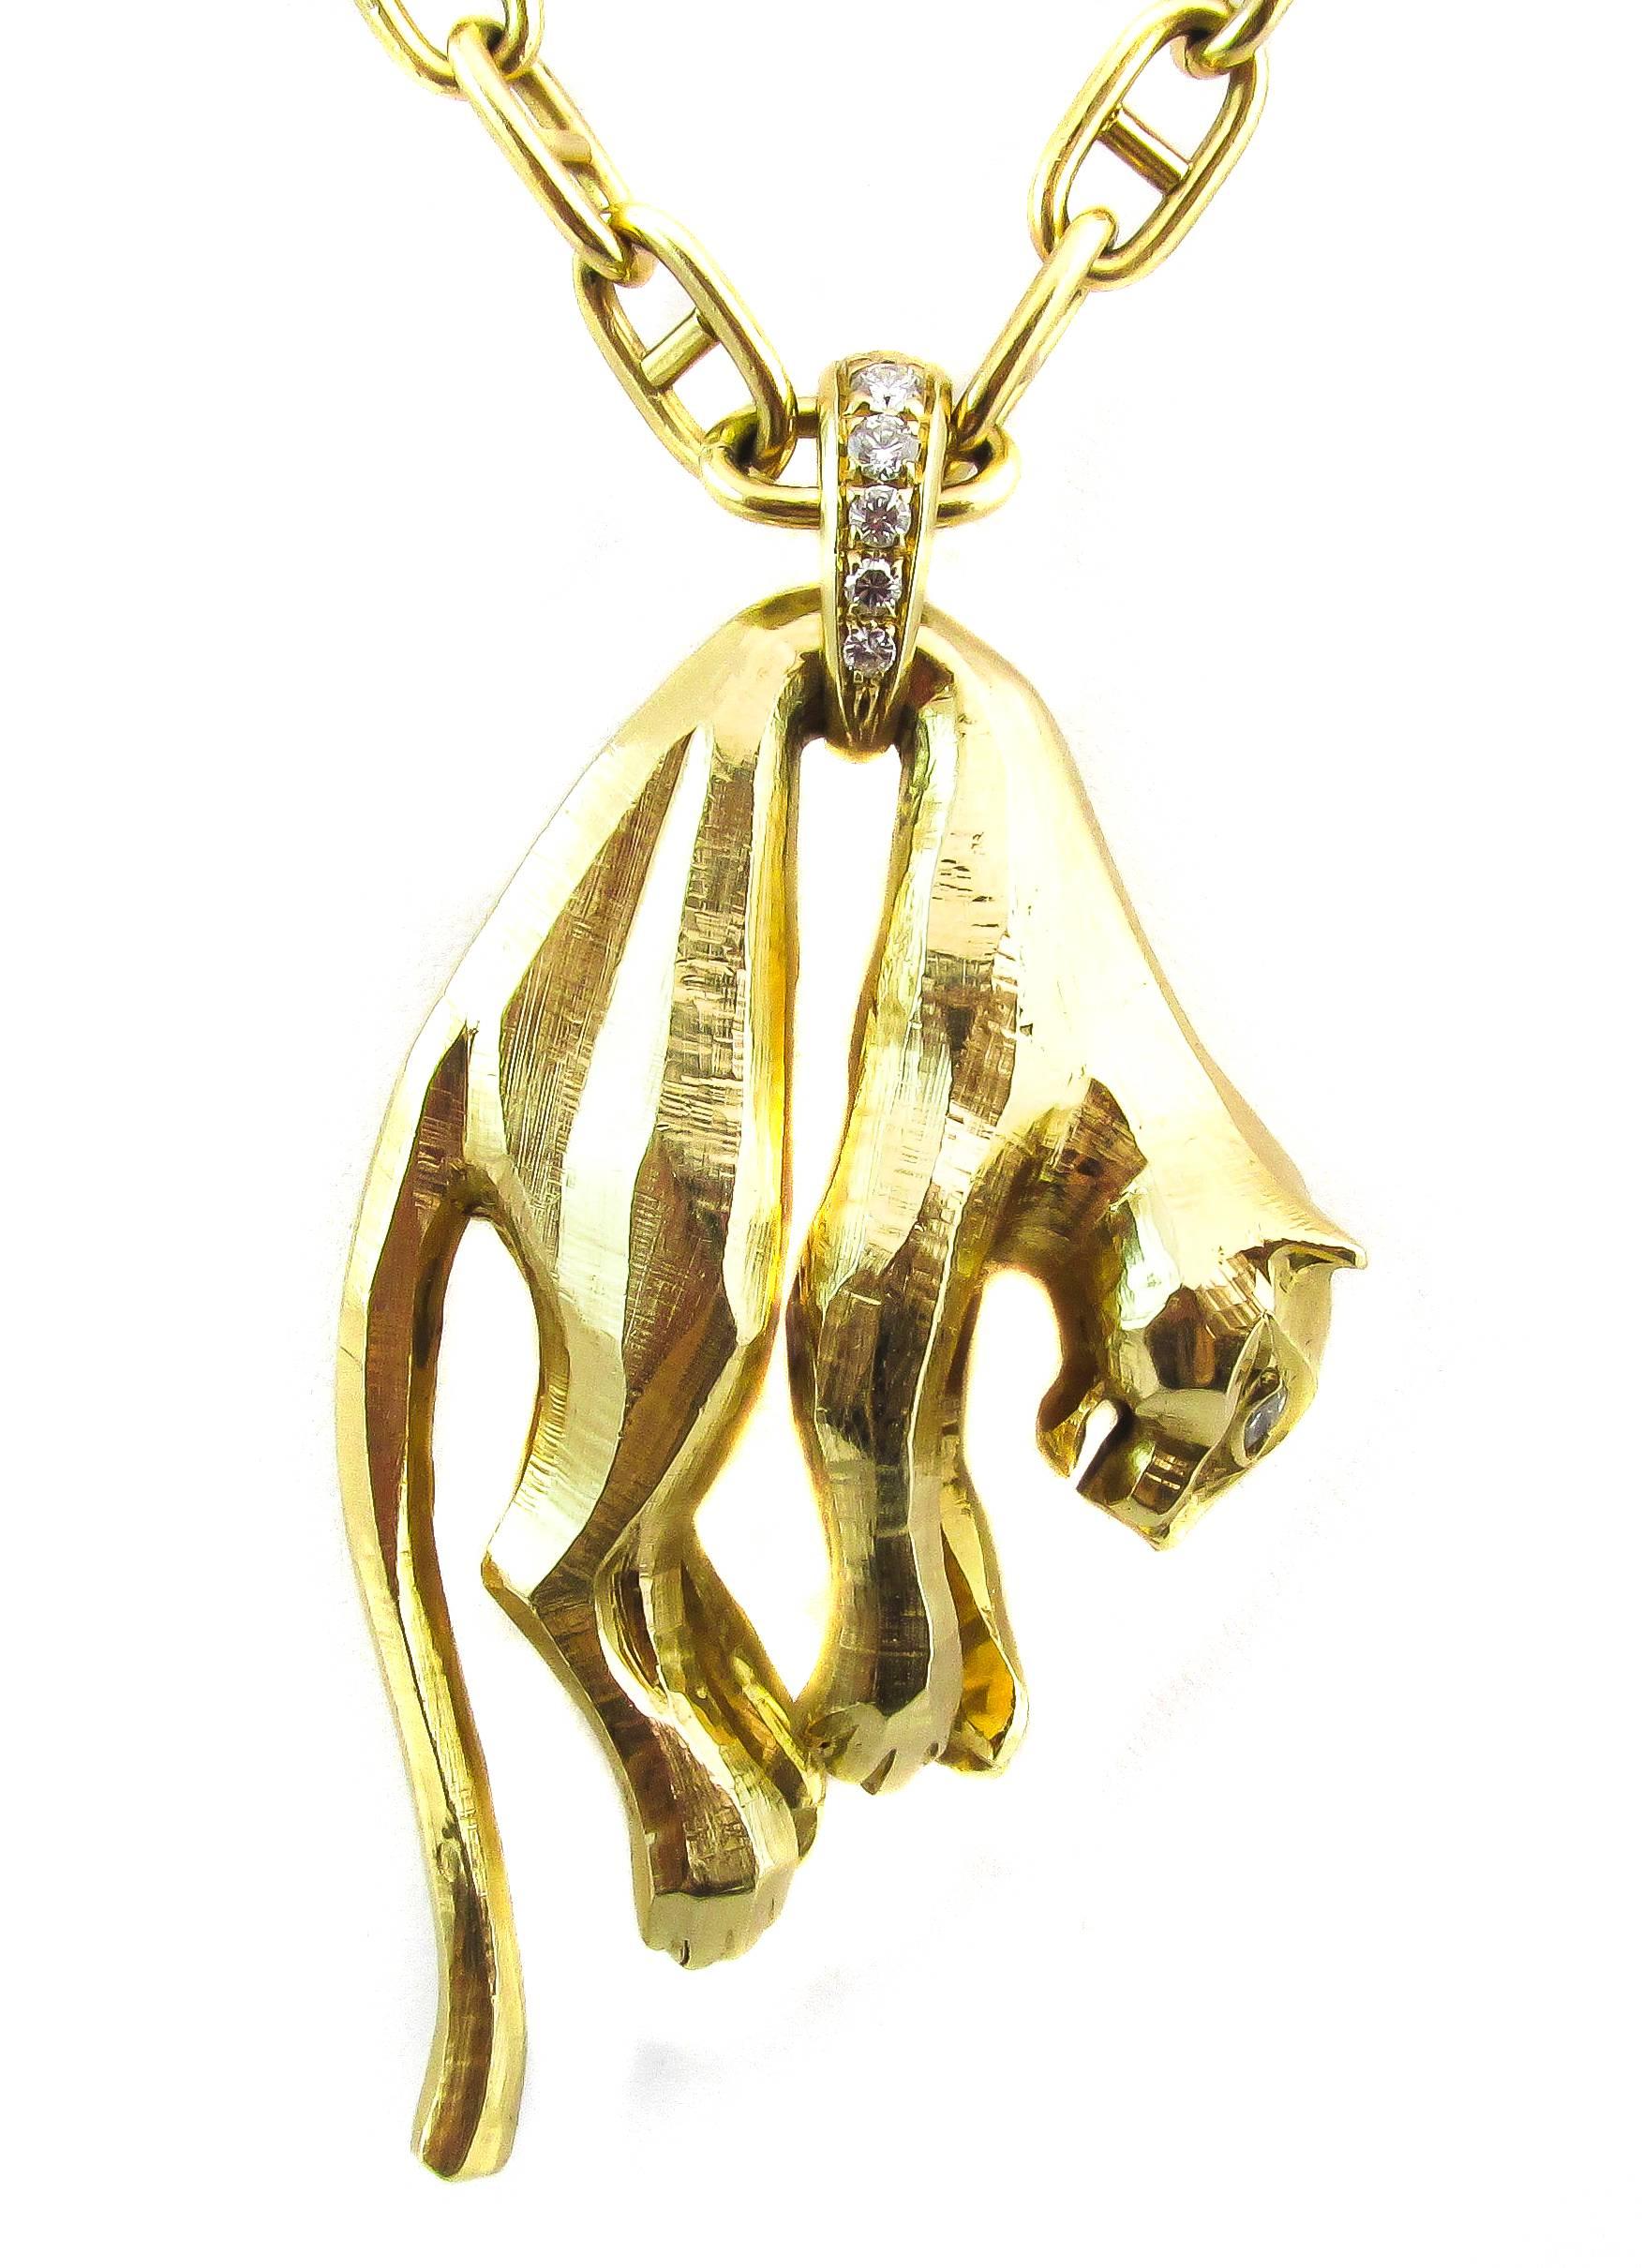 18 karat yellow gold Cartier Panther necklace. The panther, for which Cartier jewelry is famous for, was recreated in the 1980’s for this necklace. Both eyes are set marquise cut diamonds to give them a true catlike appearance and the three